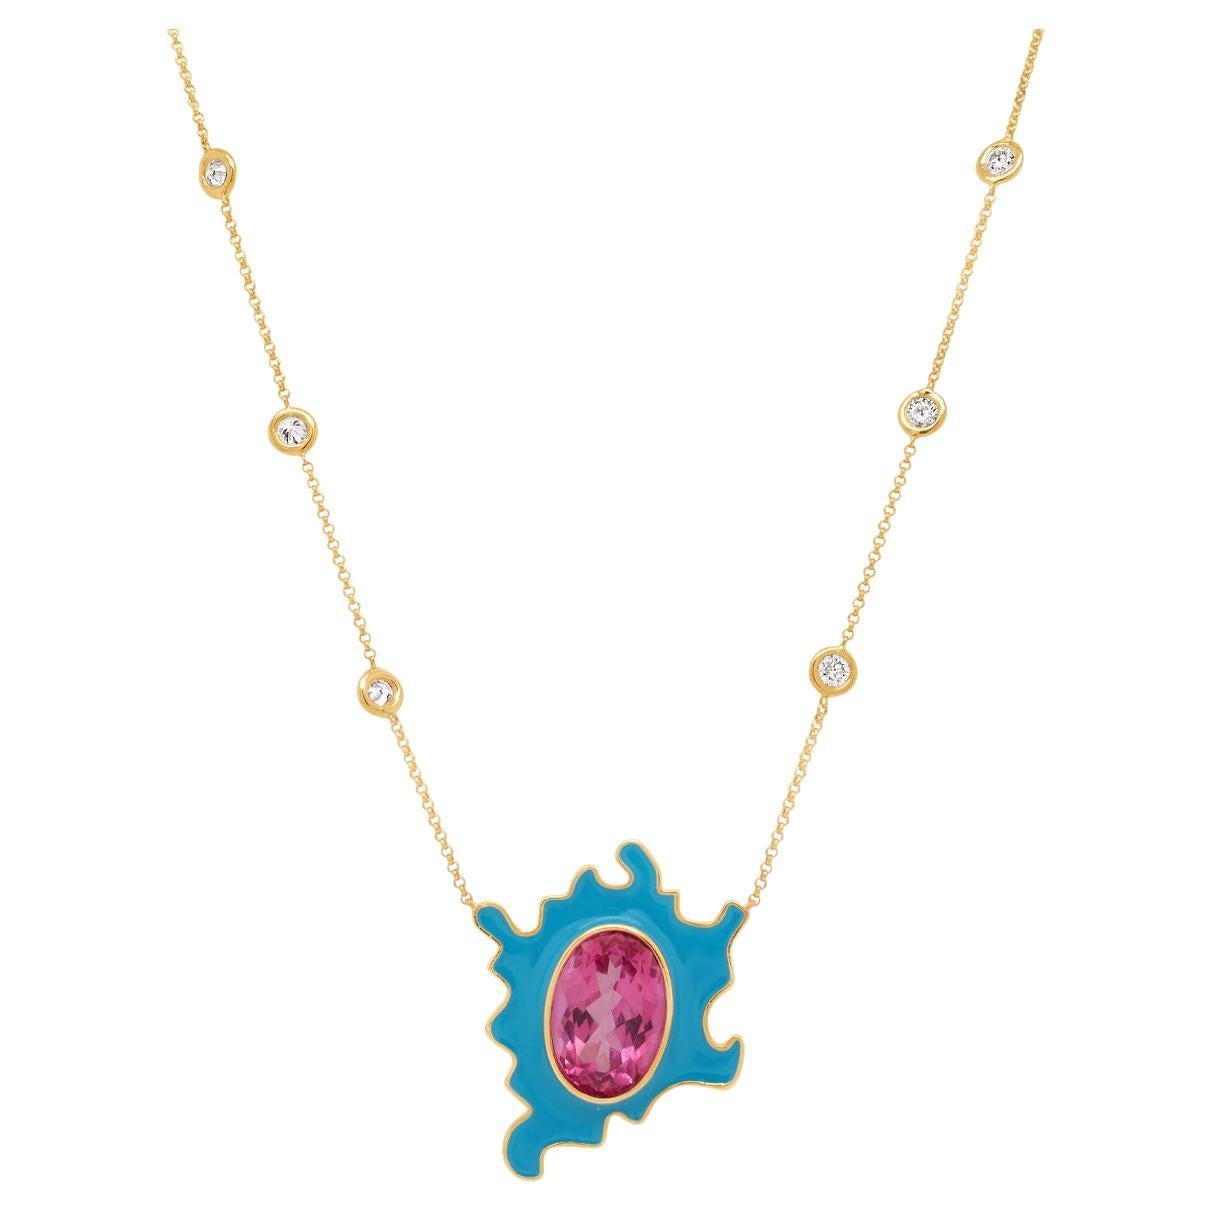 Psychedelic Solitaire Necklace 5.9gms 8.15ctw Tourmaline and Cobalt Enamel